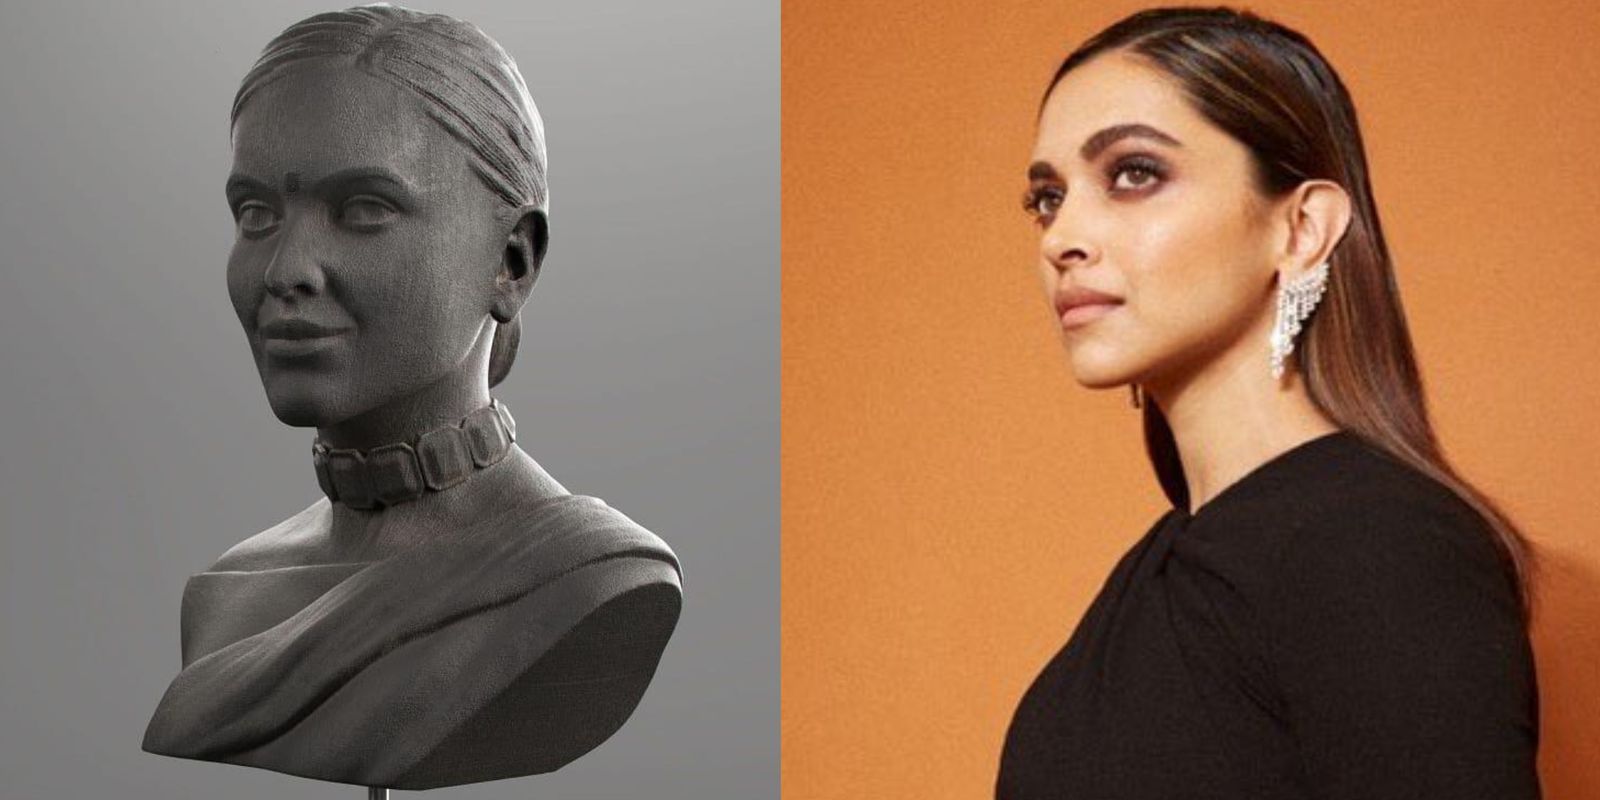 Deepika Padukone Featured In A Special Exhibition At Athens International Airport To Give The Travelers A Warm Welcome